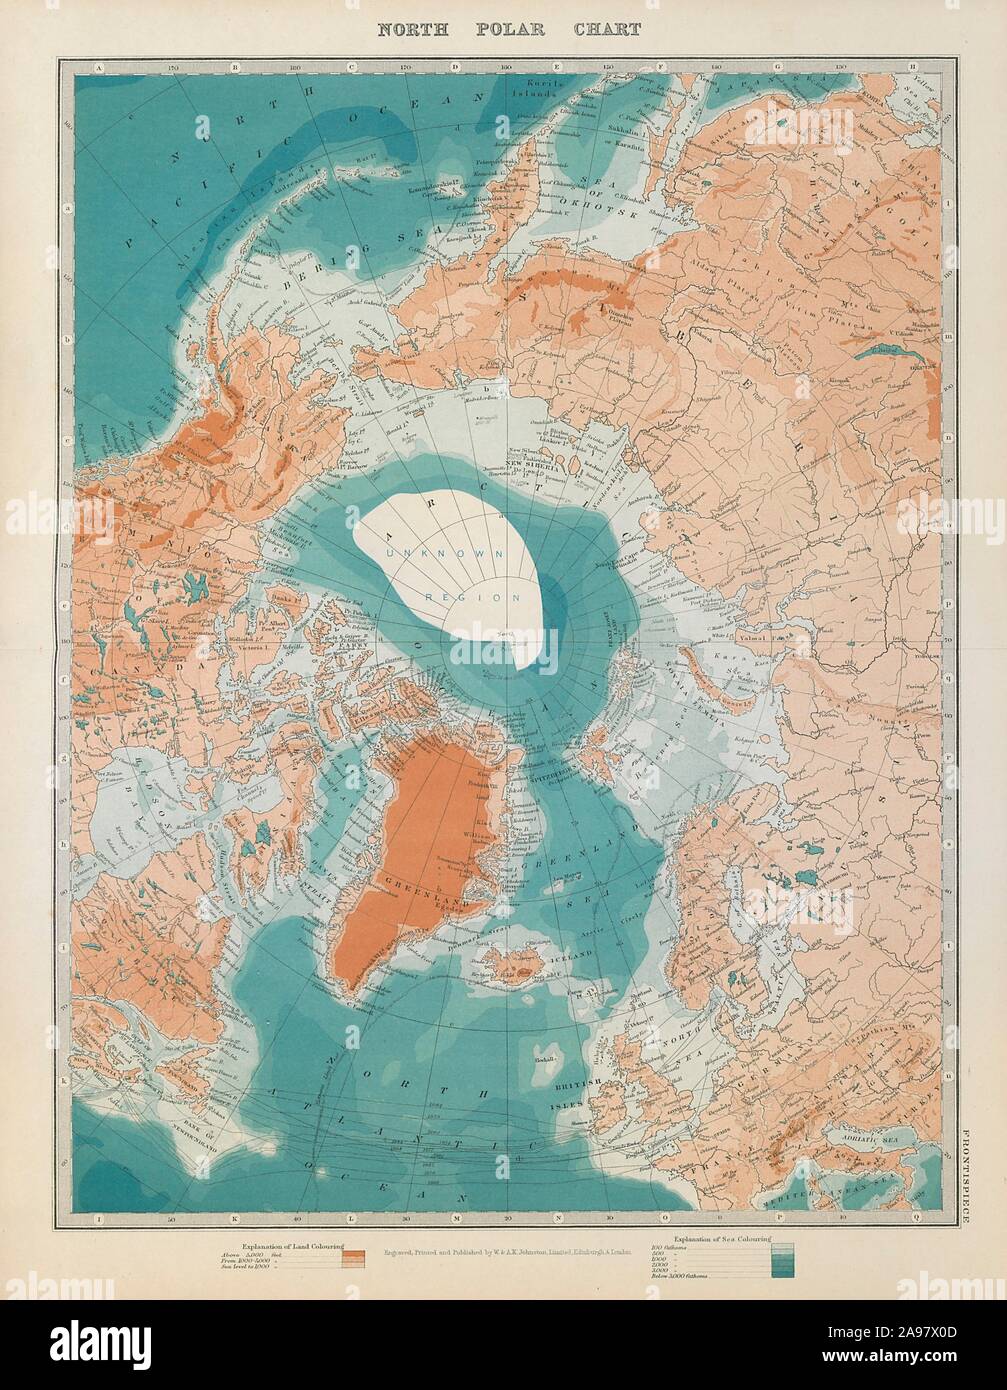 ARCTIC. Show's Peary claim to have reached North Pole. JOHNSTON 1915 old map Stock Photo